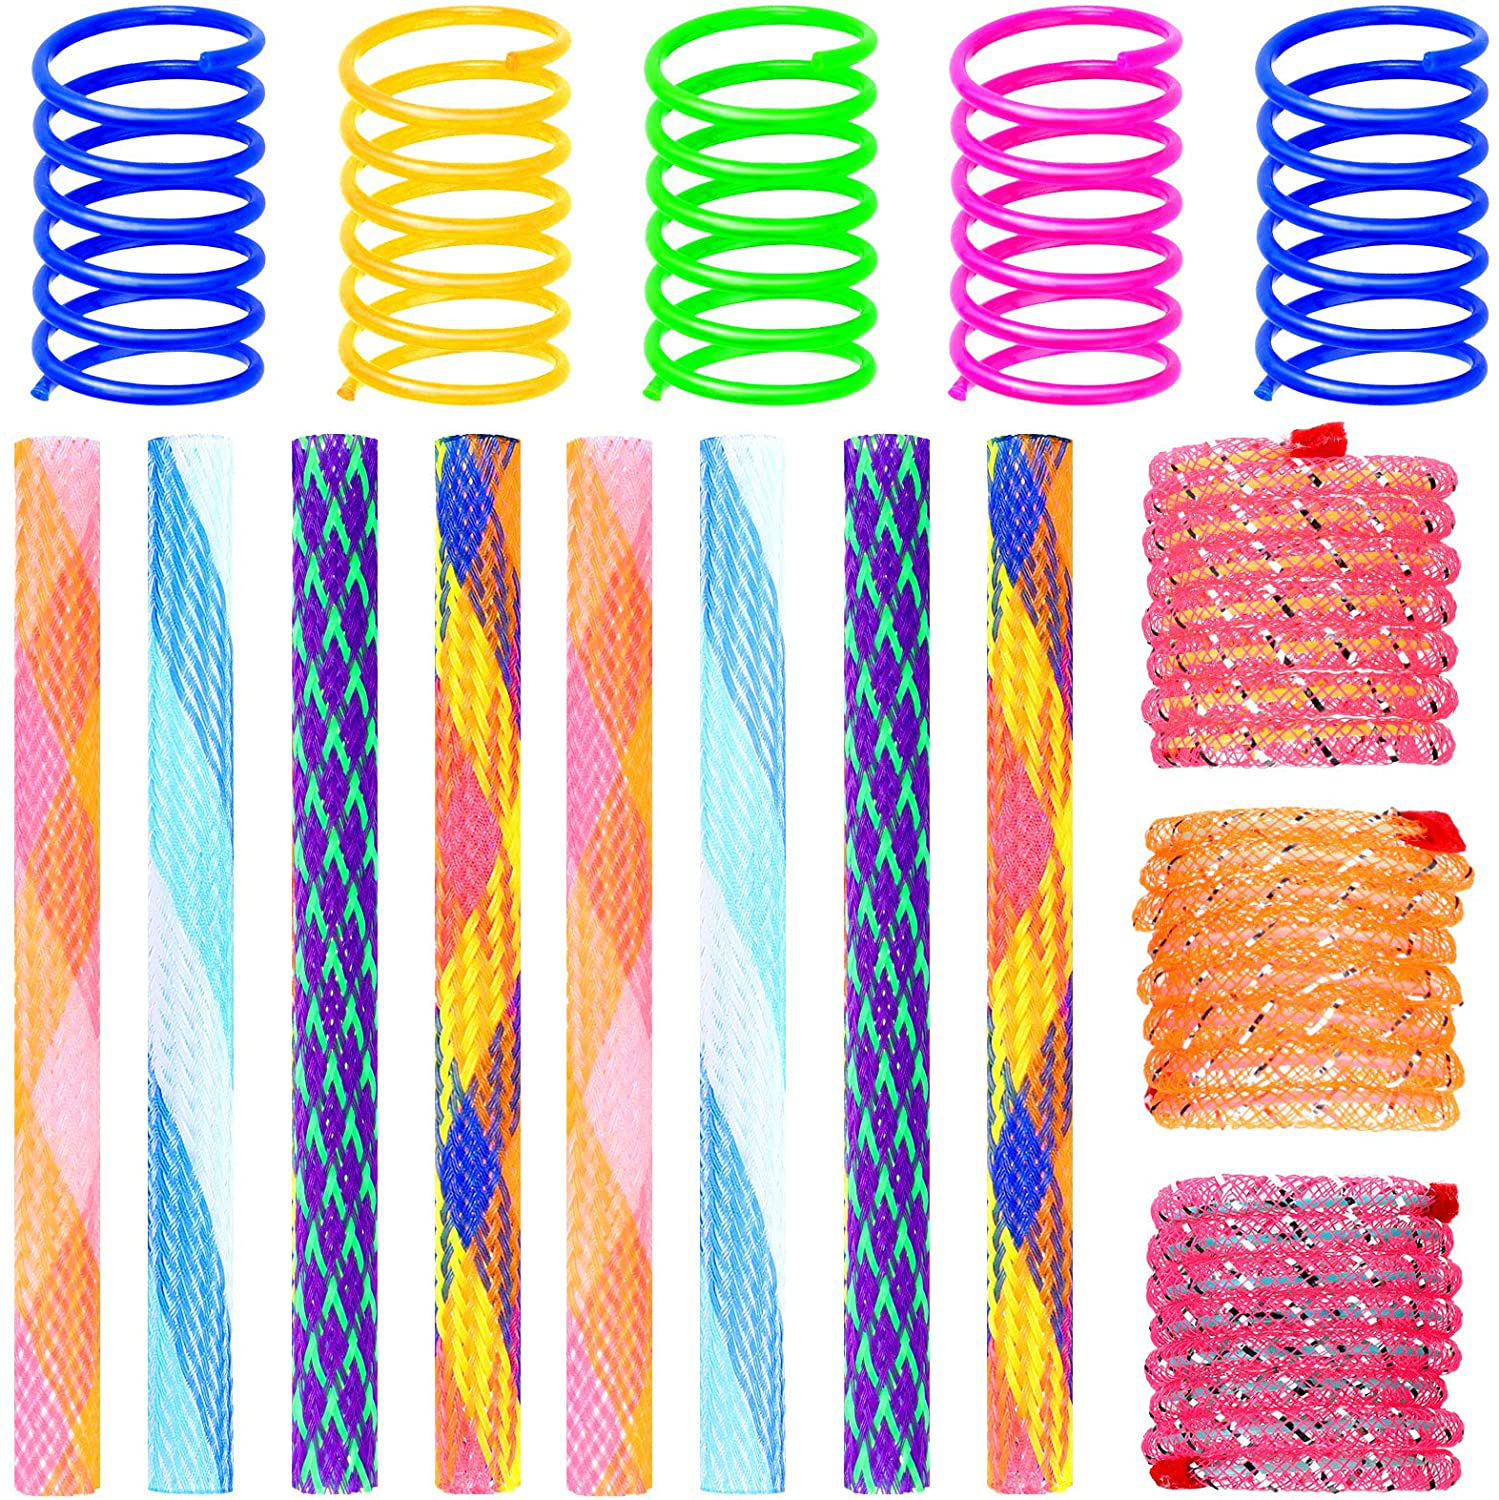 Sratte 30 Pieces Cat Spring Toys Set Colorful Coils for Kittens Cat Plastic Coil Spiral Springs Toys Playful Coils for Cats Kittens, Random Color Animals & Pet Supplies > Pet Supplies > Cat Supplies > Cat Toys Sratte   